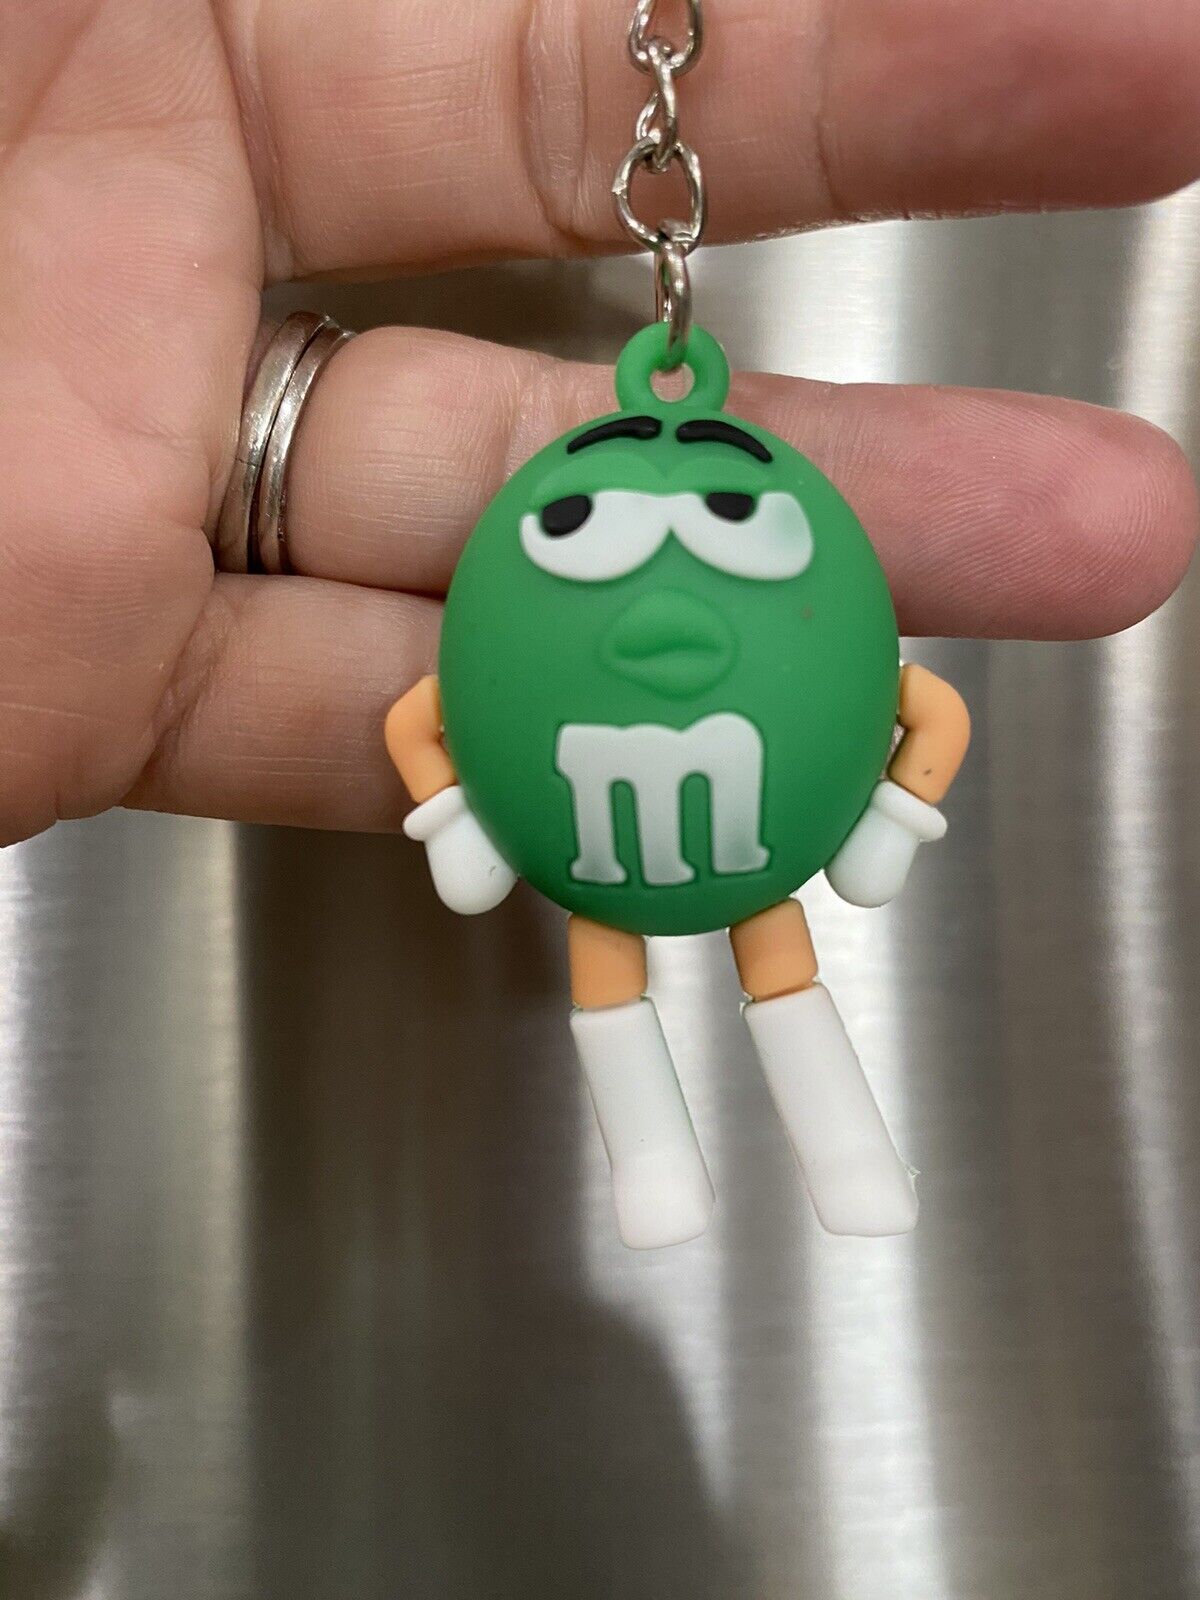 M & M Chocolate Candies, Keychain, Backpack Charm, 2” Length, Green